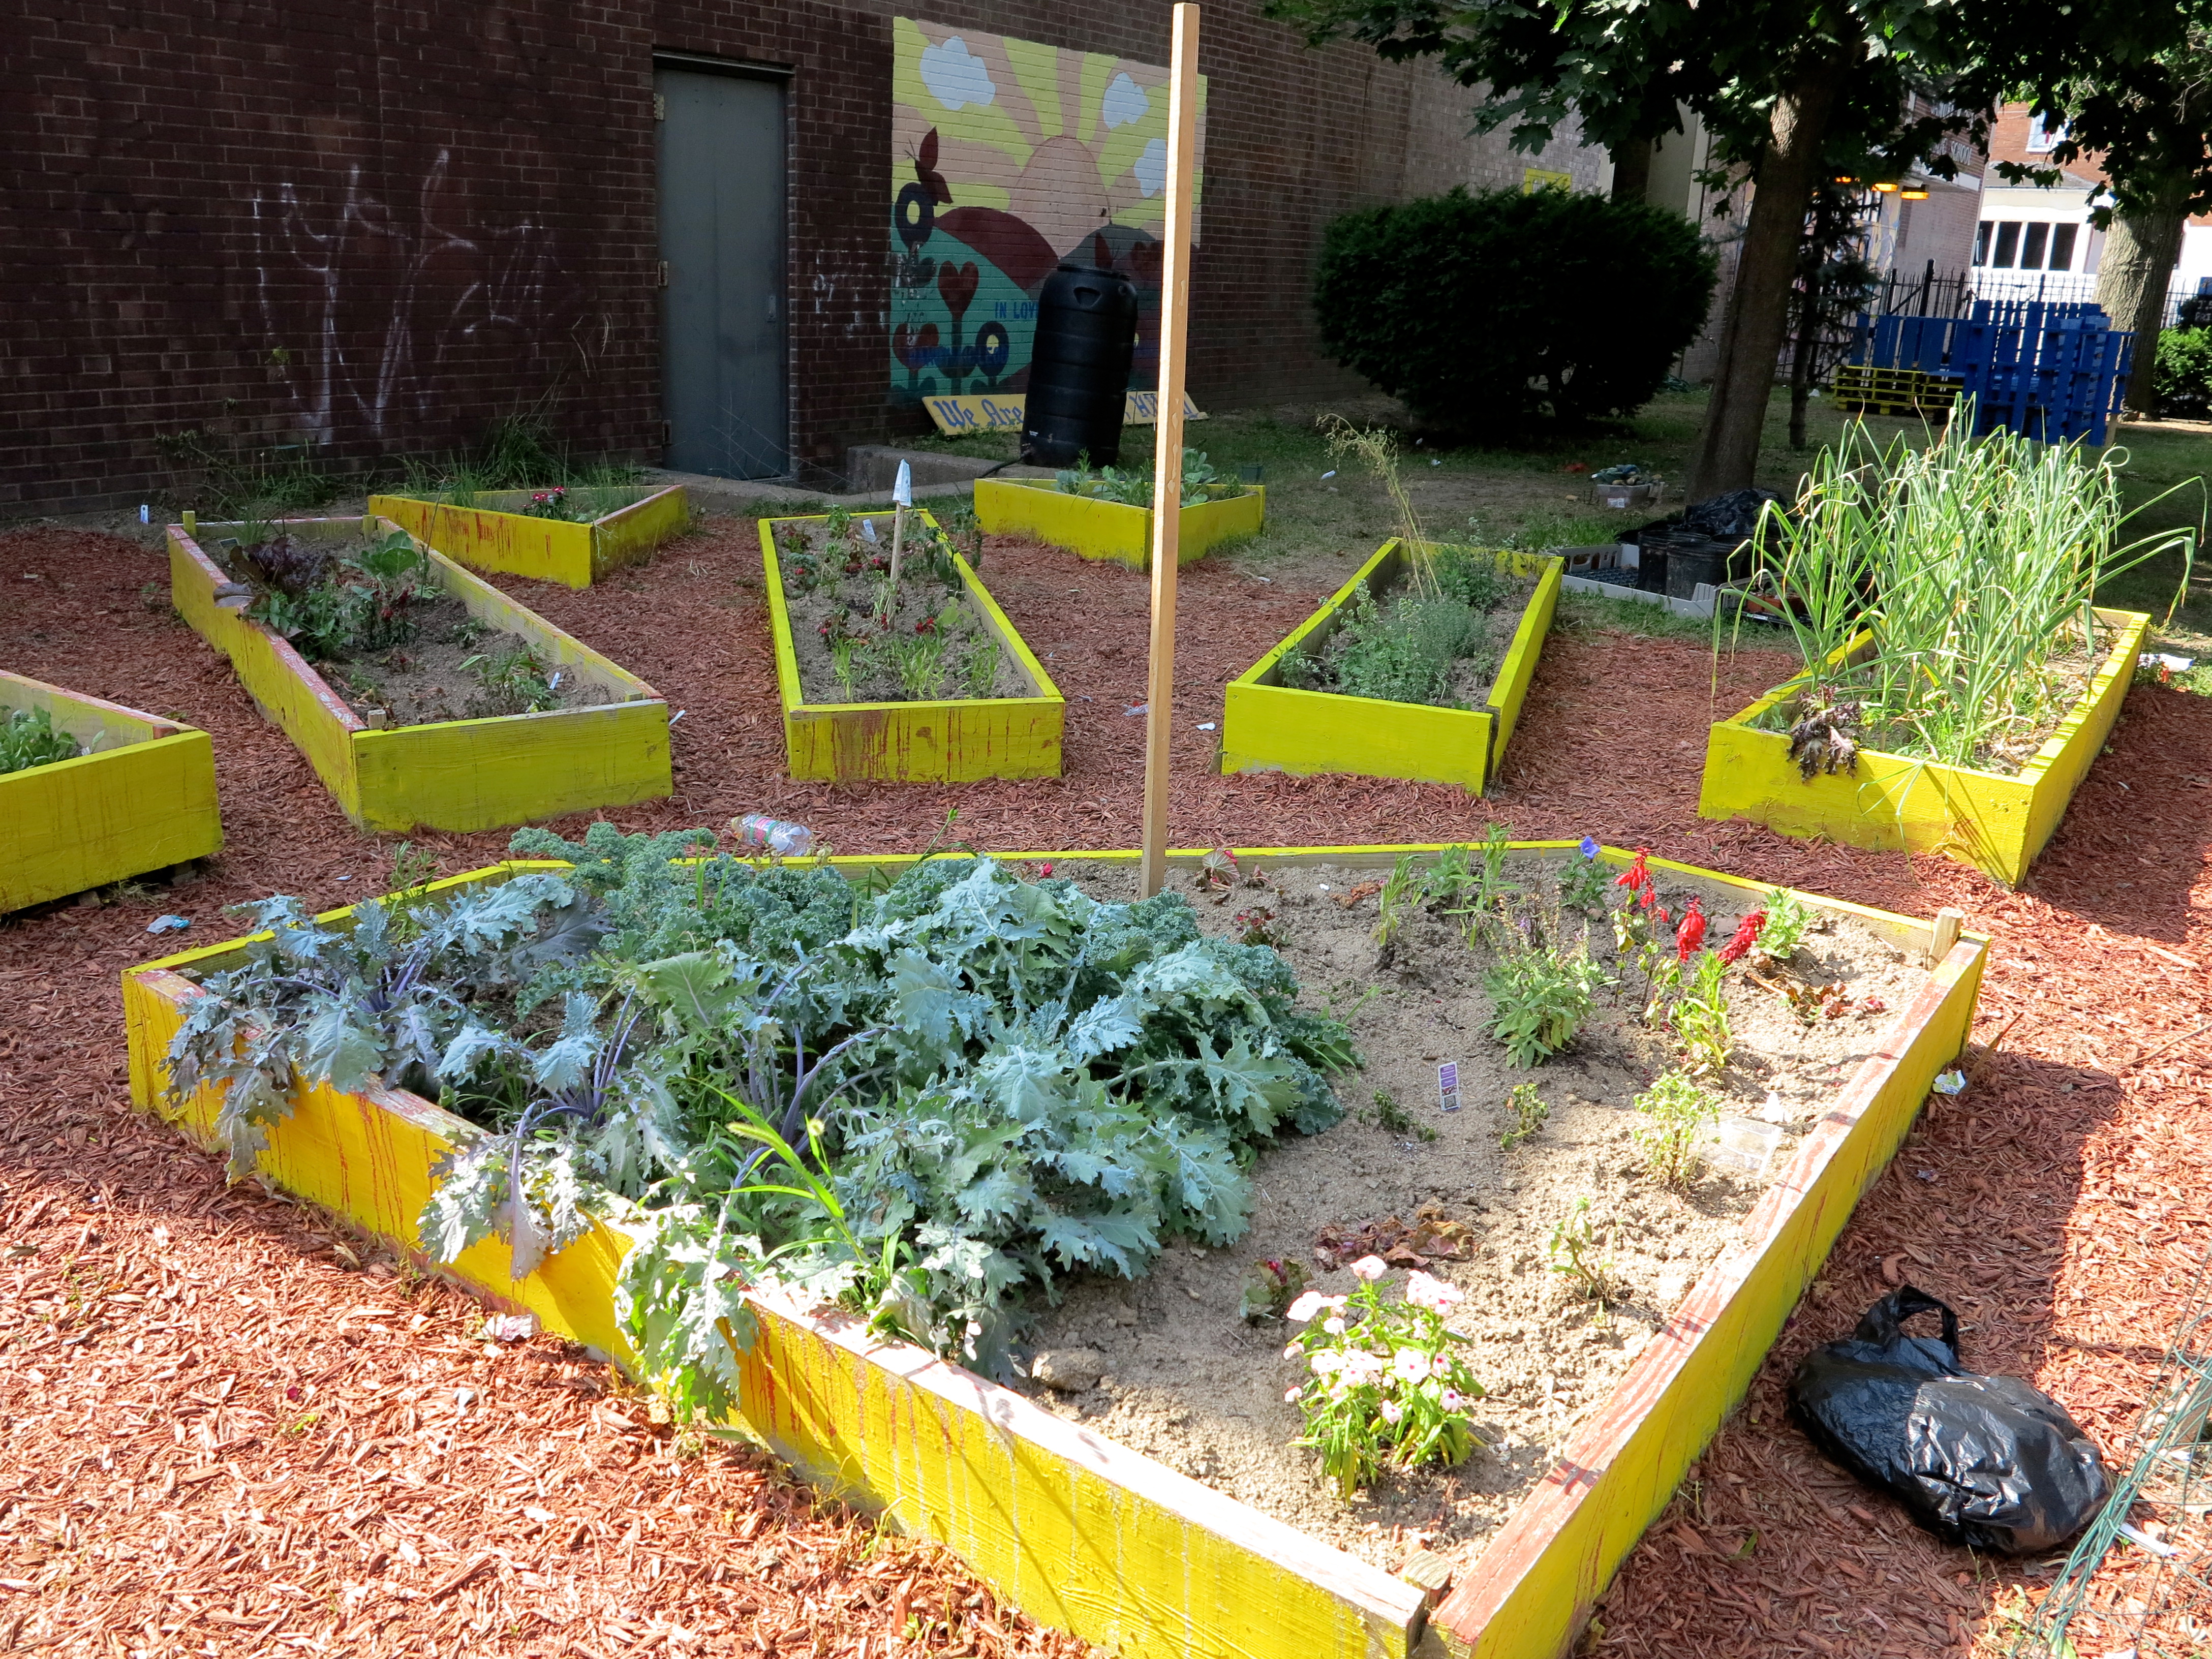 Huey Elementary's repainted, planted and weeded raised beds in a sunburst pattern.